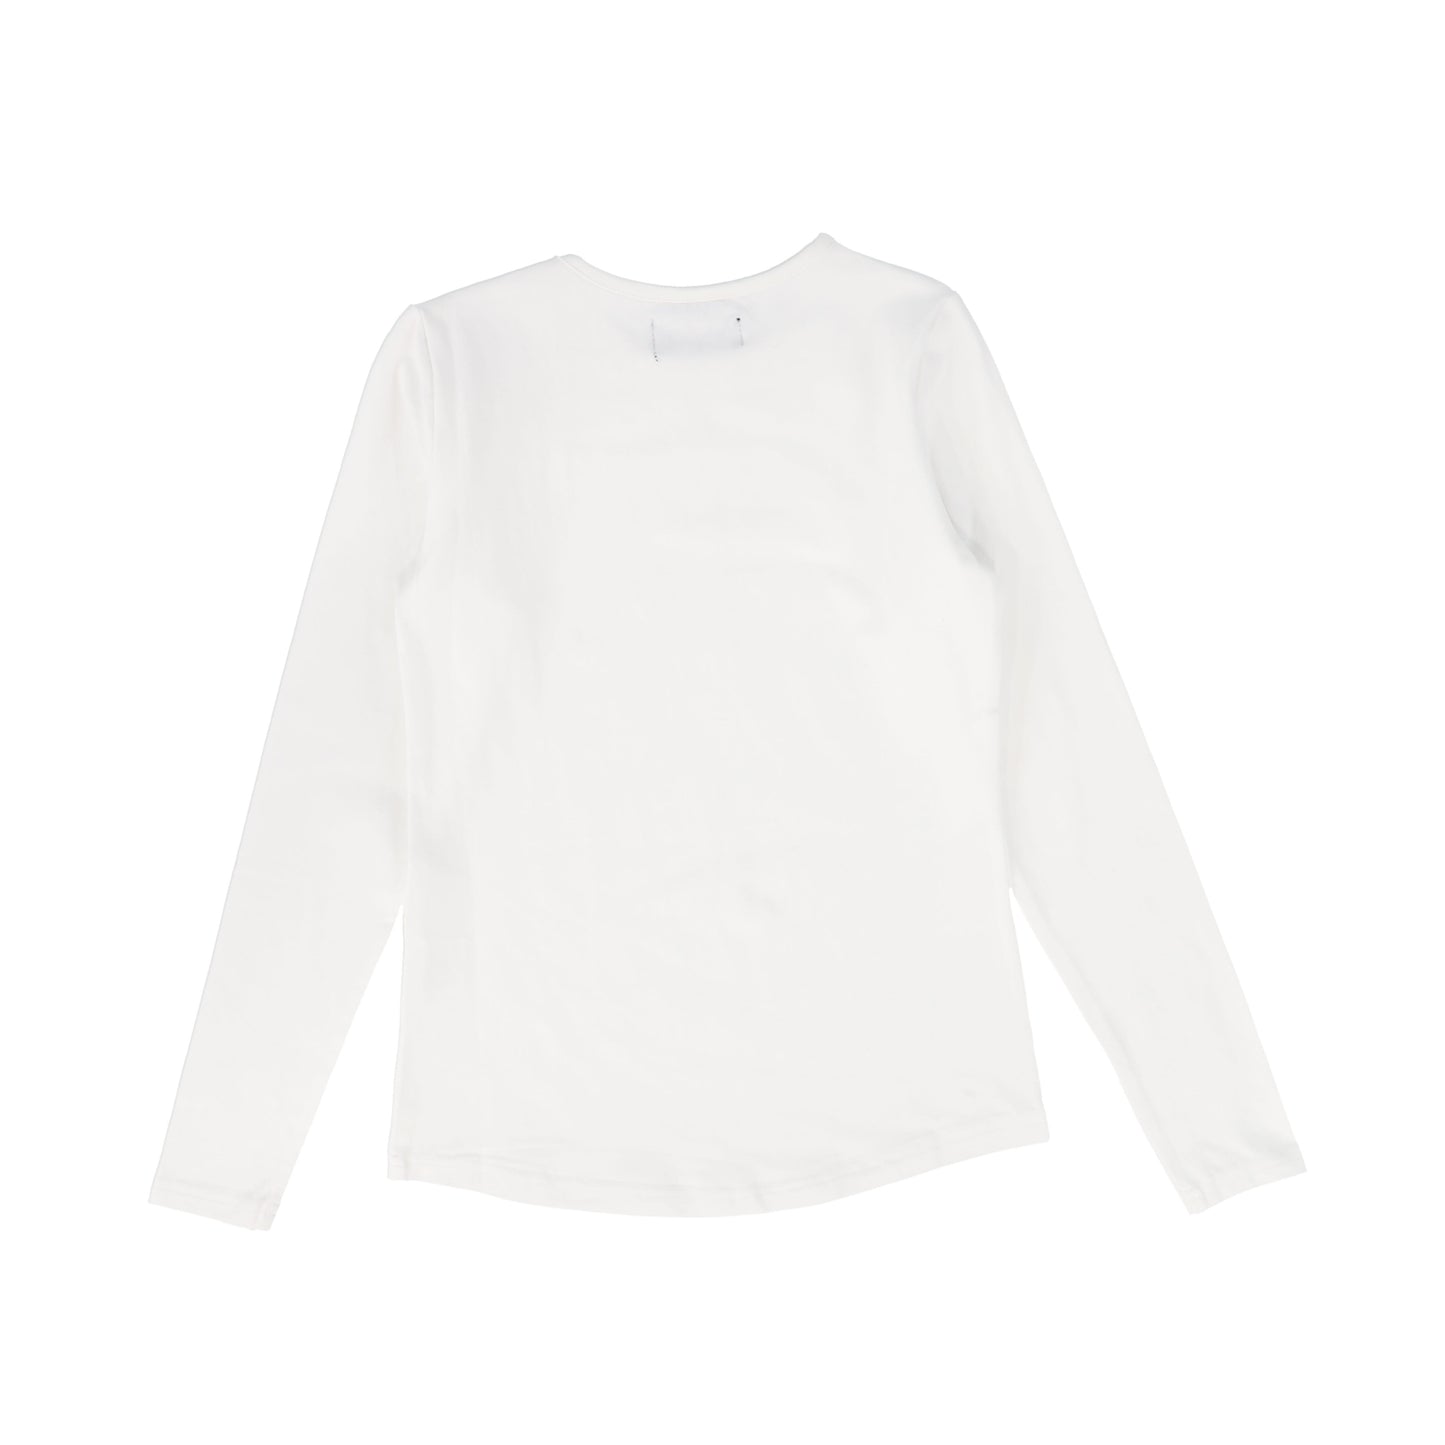 NAVVY WHITE SOLID TEE [FINAL SALE]